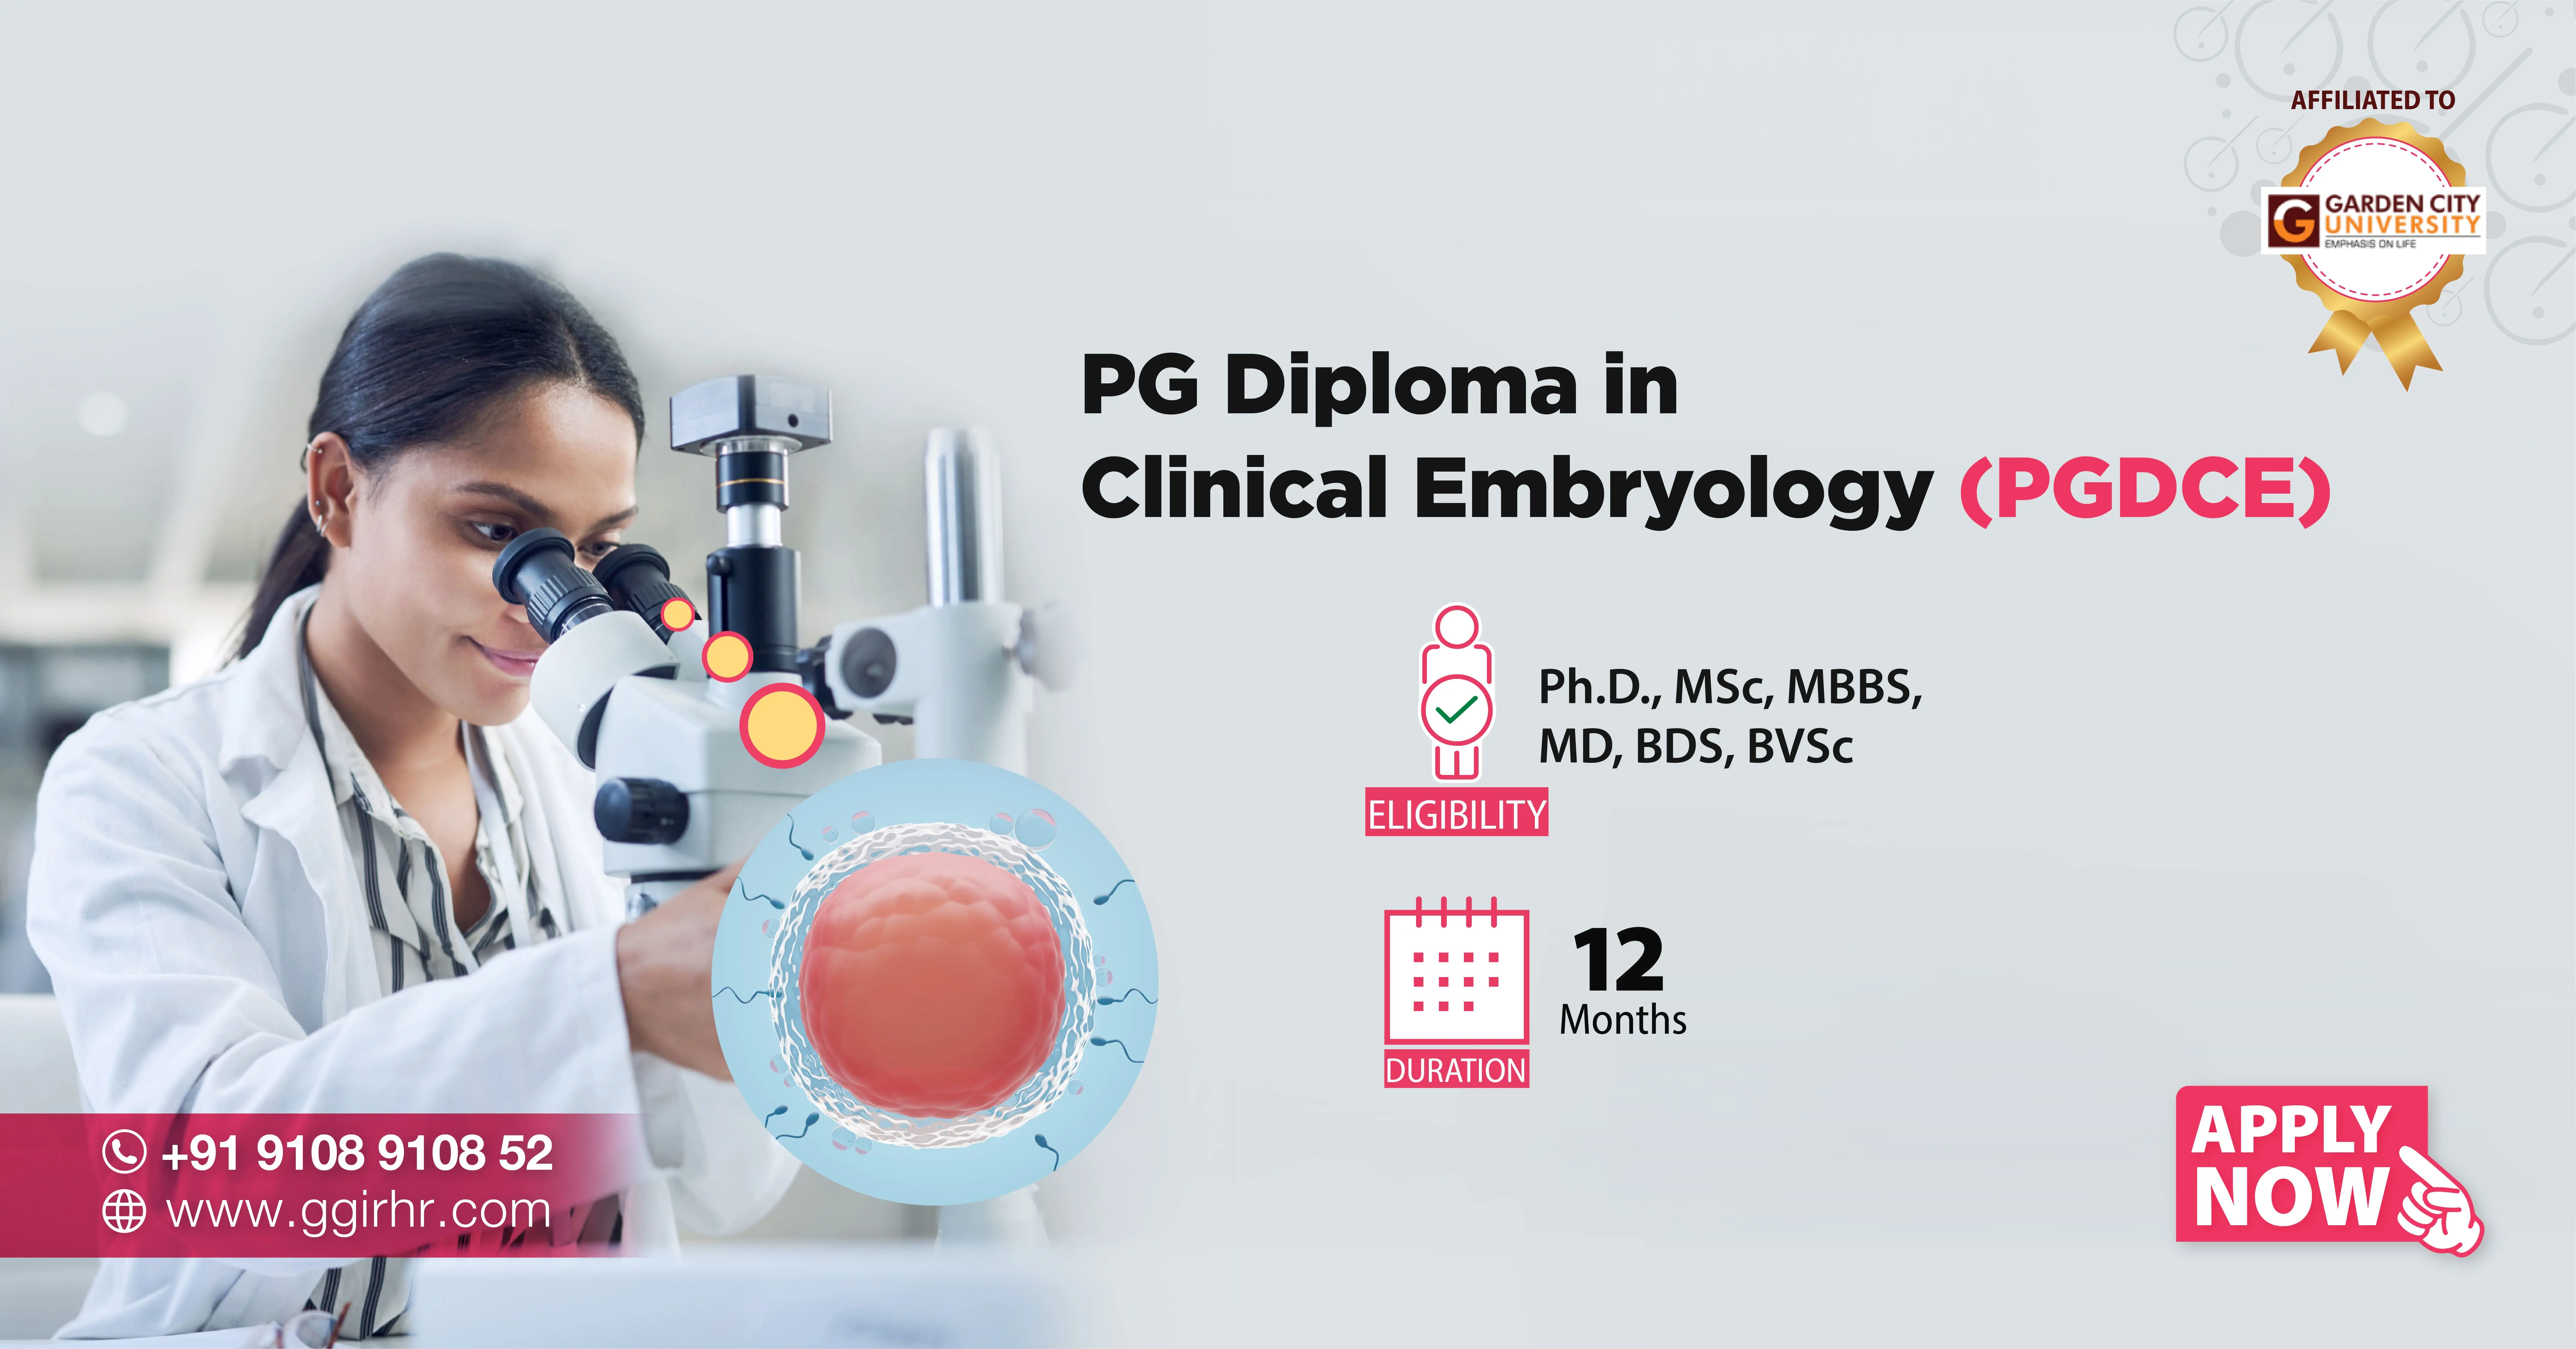 Post Graduate Diploma in Clinical Embryology (PGDCE) Program 